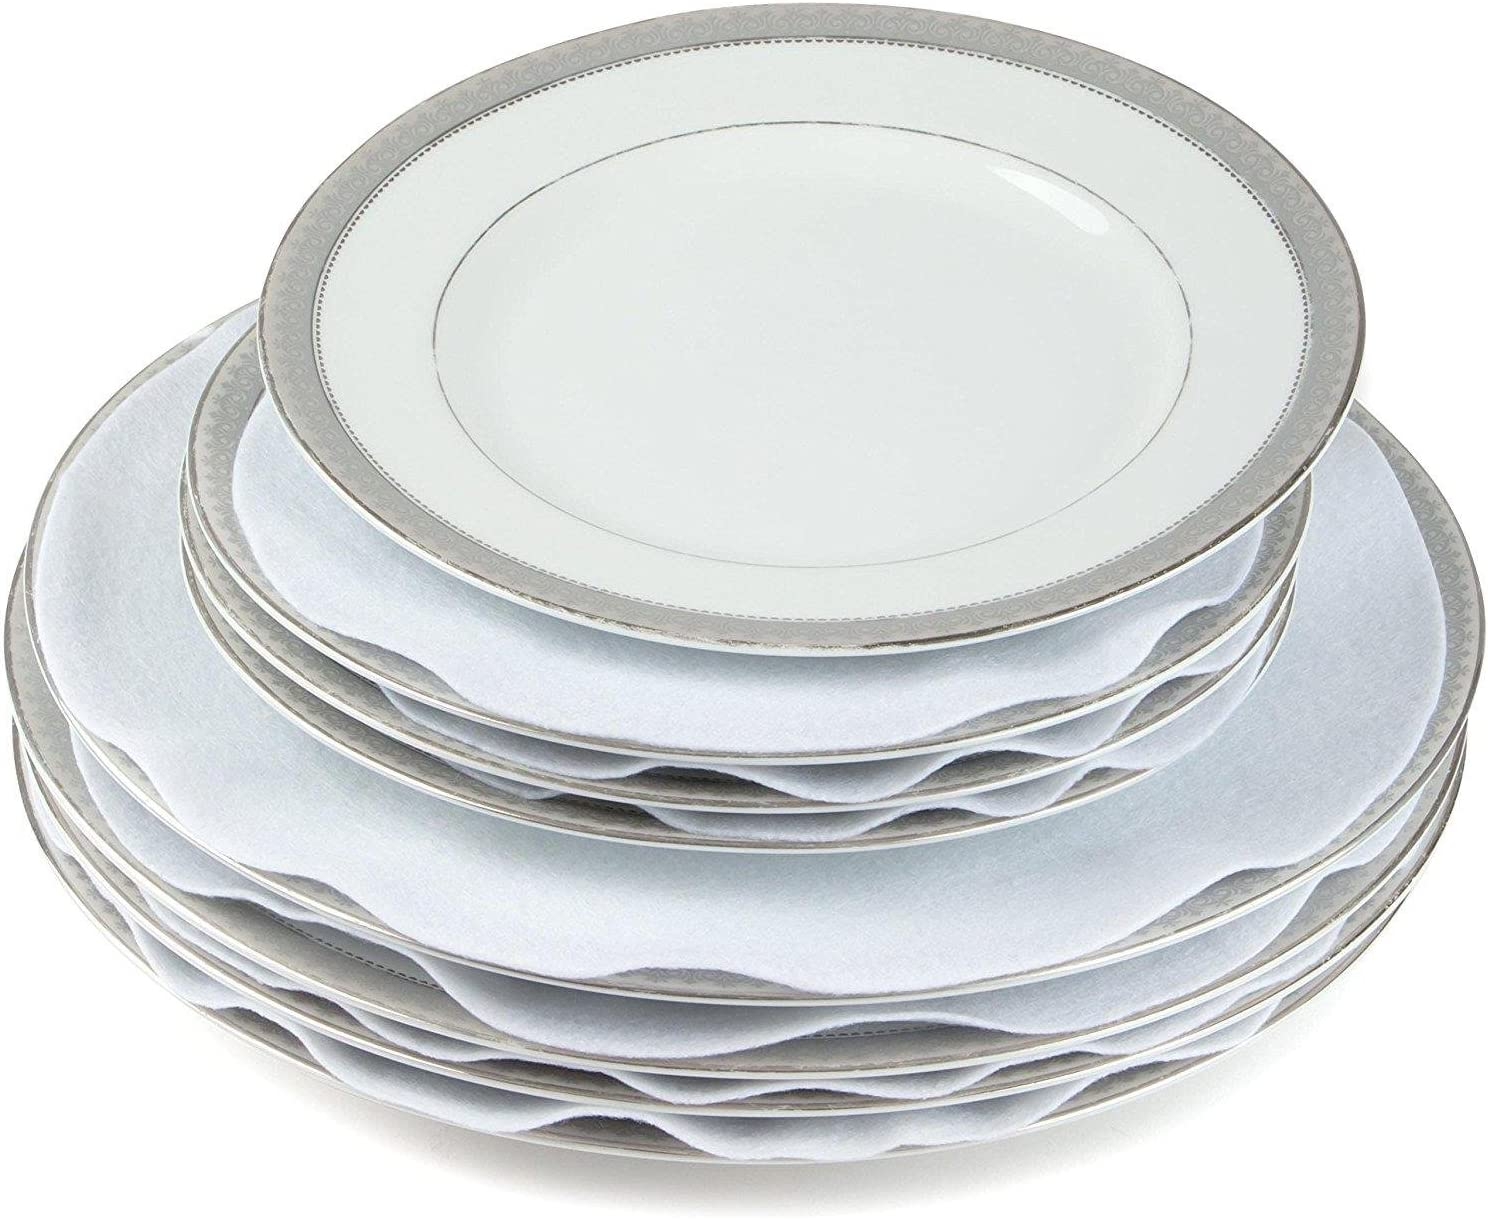 Felt Plate China Storage Dividers Protectors Grey Large Thick and Premium Soft (Round, Grey) Import To Shop ×Product